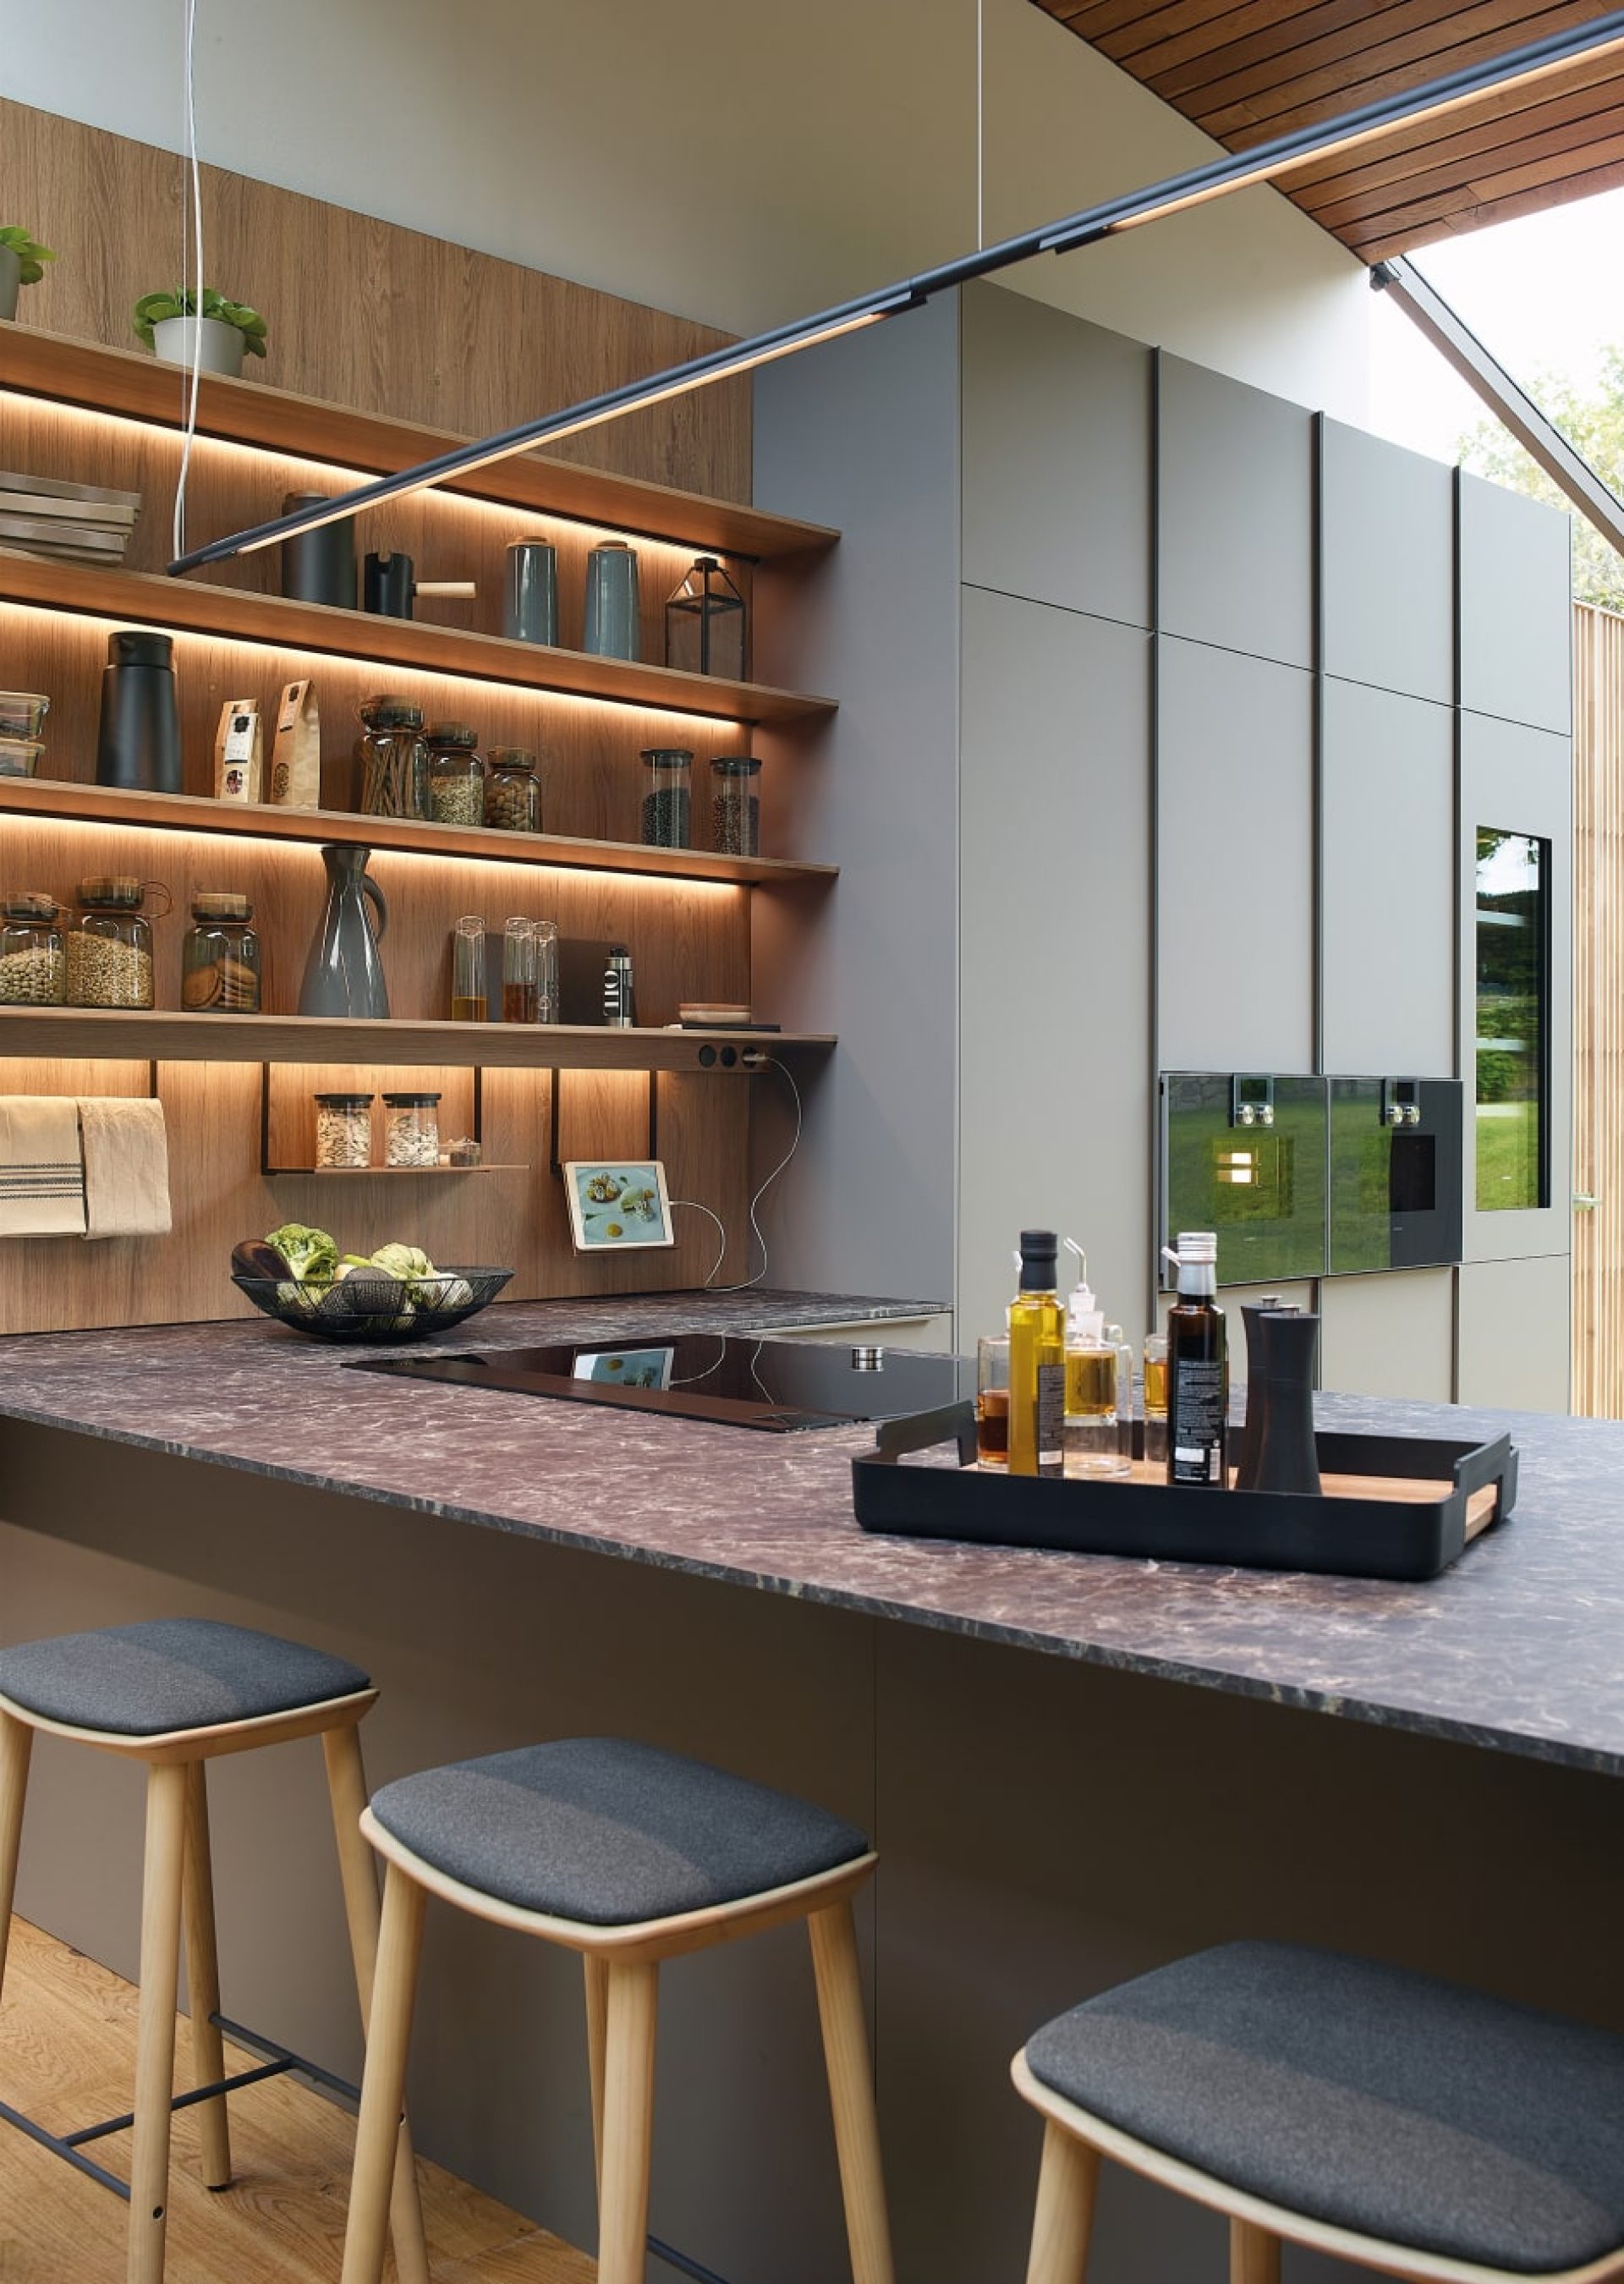 Grey and wood kitchen, with lighted shelving unit and peninsula with a raised bar